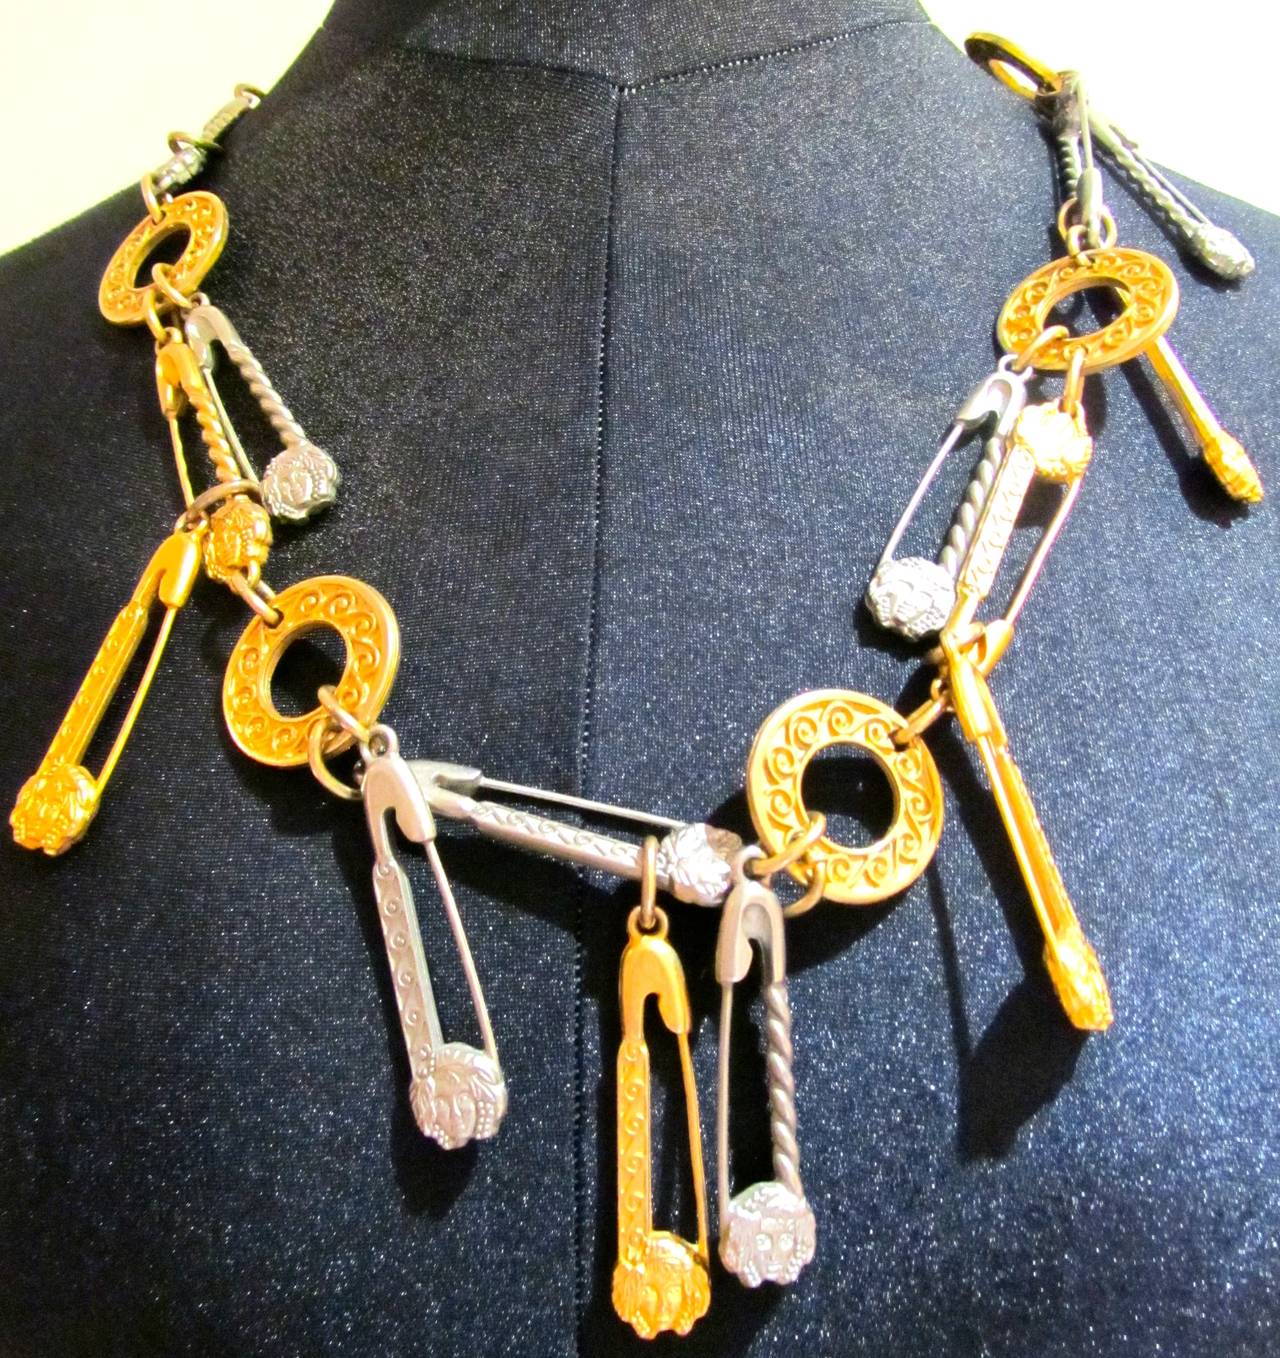 Women's Gianni Versace Necklace / Belt - Iconic Silver and Gold Tone Safety Pins - 1995